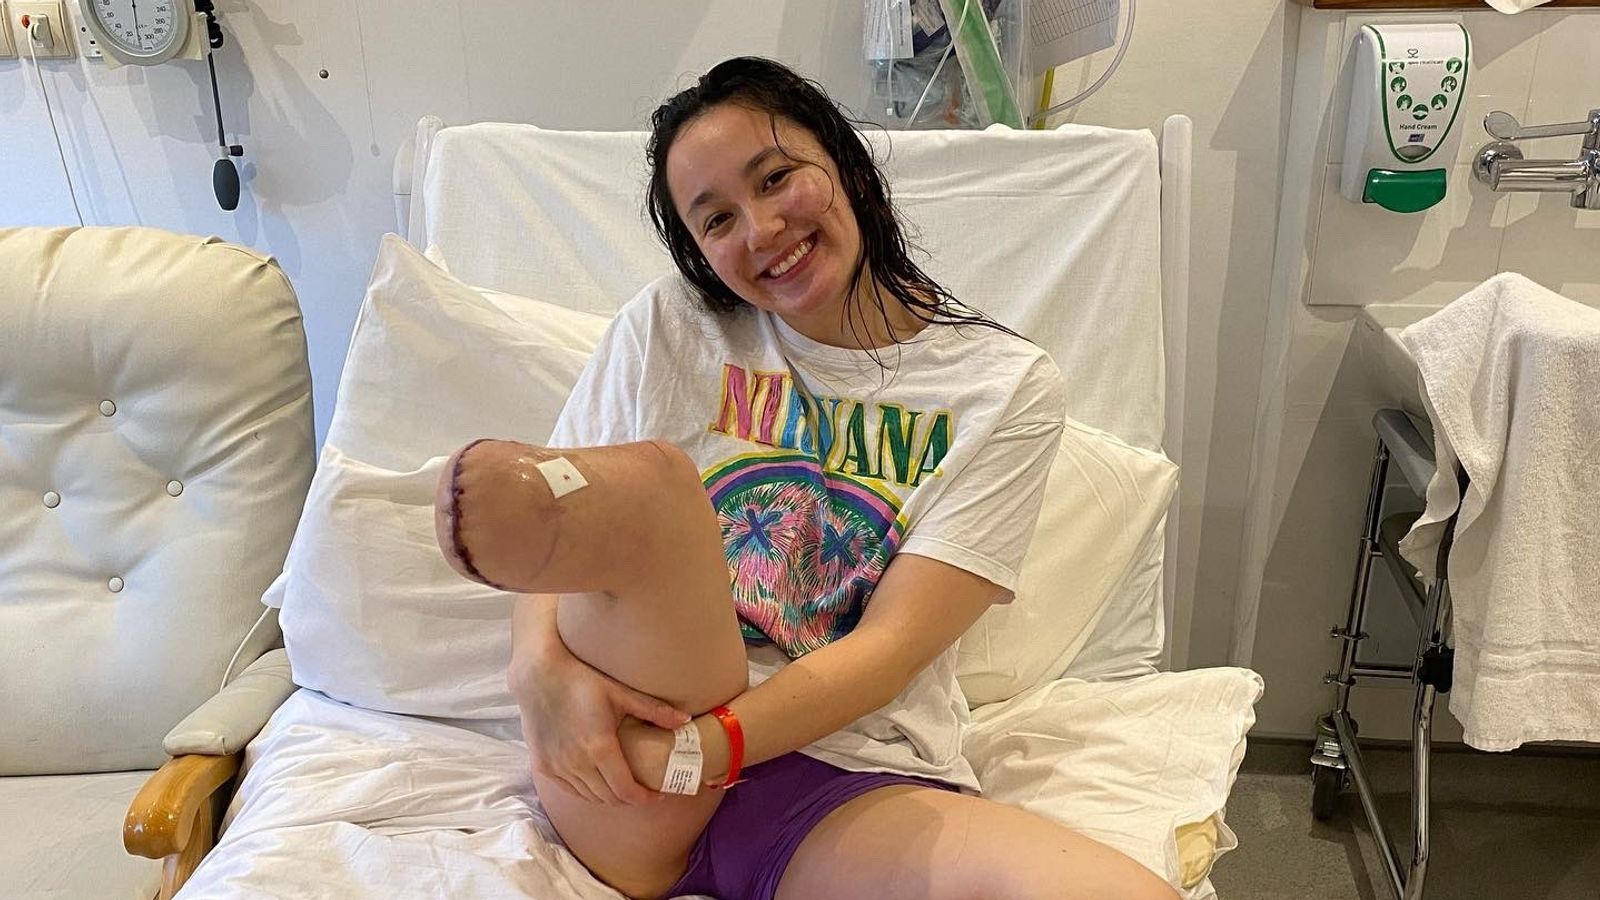 Paralympic swimming champion Alice Tai 'healthy, happy and thriving' after foot amputation